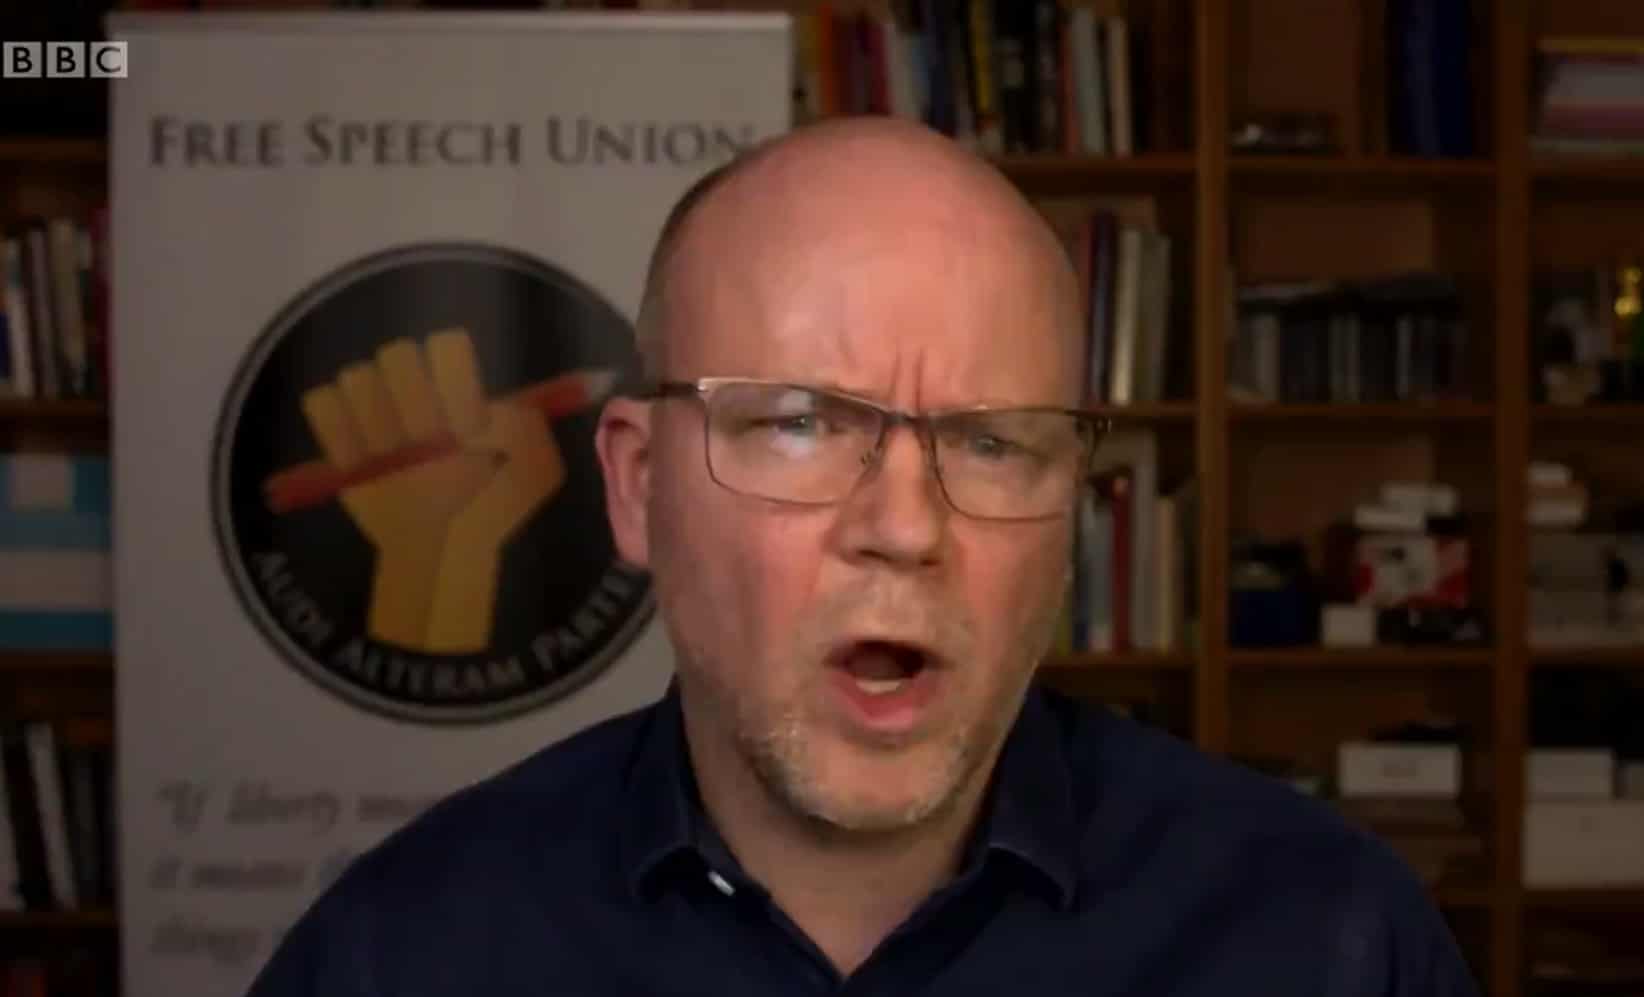 PayPal suspends Toby Young’s Free Speech Union accounts over Covid ‘misinformation’